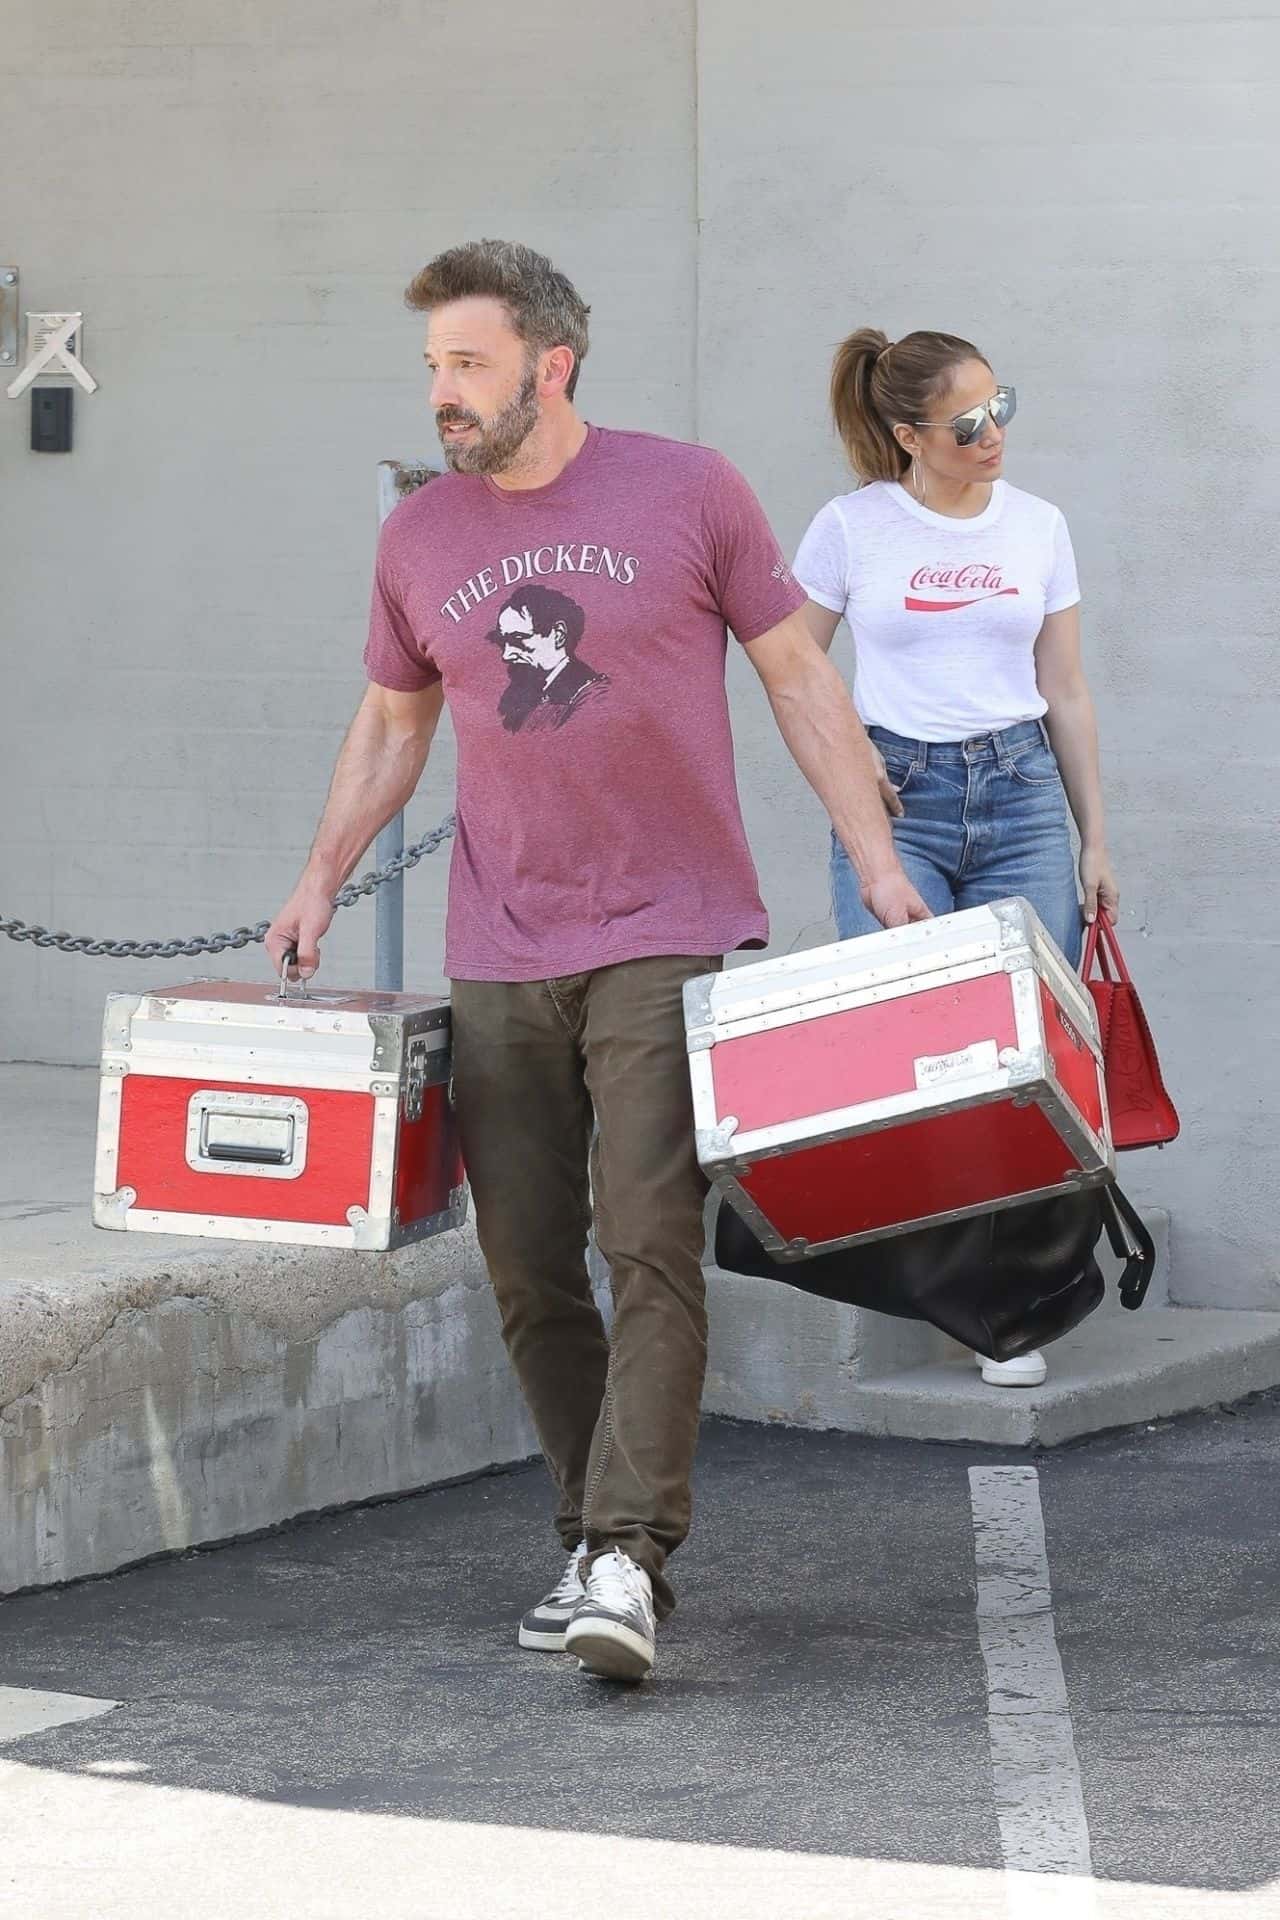 Jennifer Lopez Wears a Coca-Cola T-shirt as She Leaves the Studio with Ben Affleck